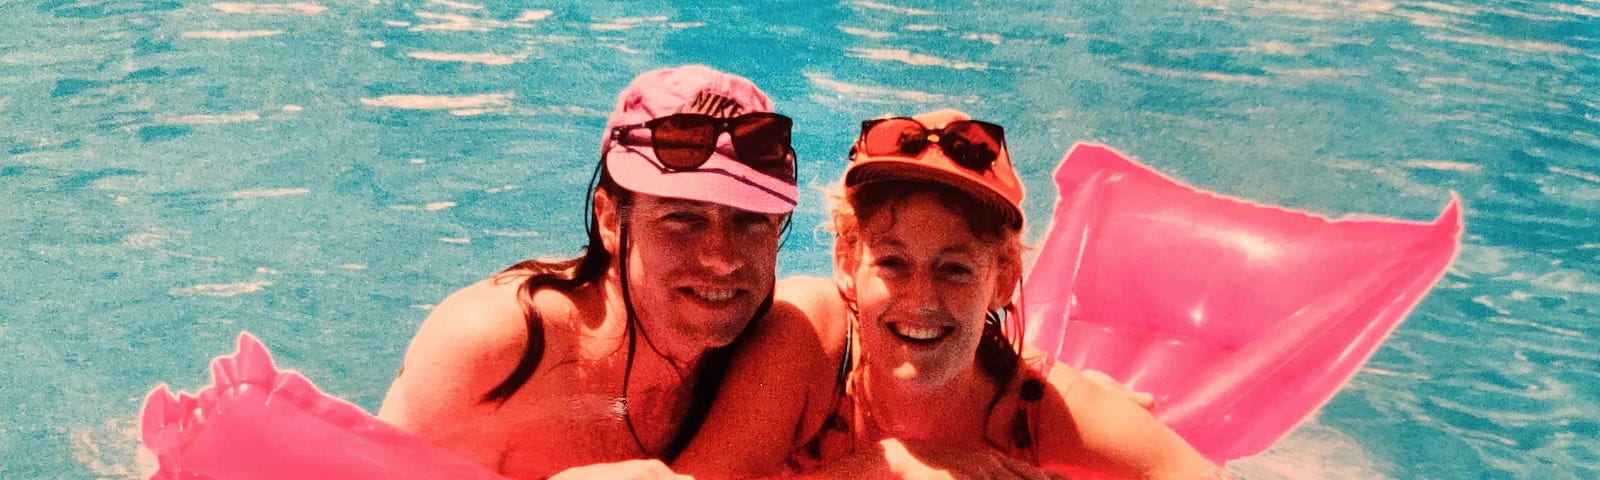 Two adults holding onto a bright pink inflatable airbed in a swimming pool in summer.